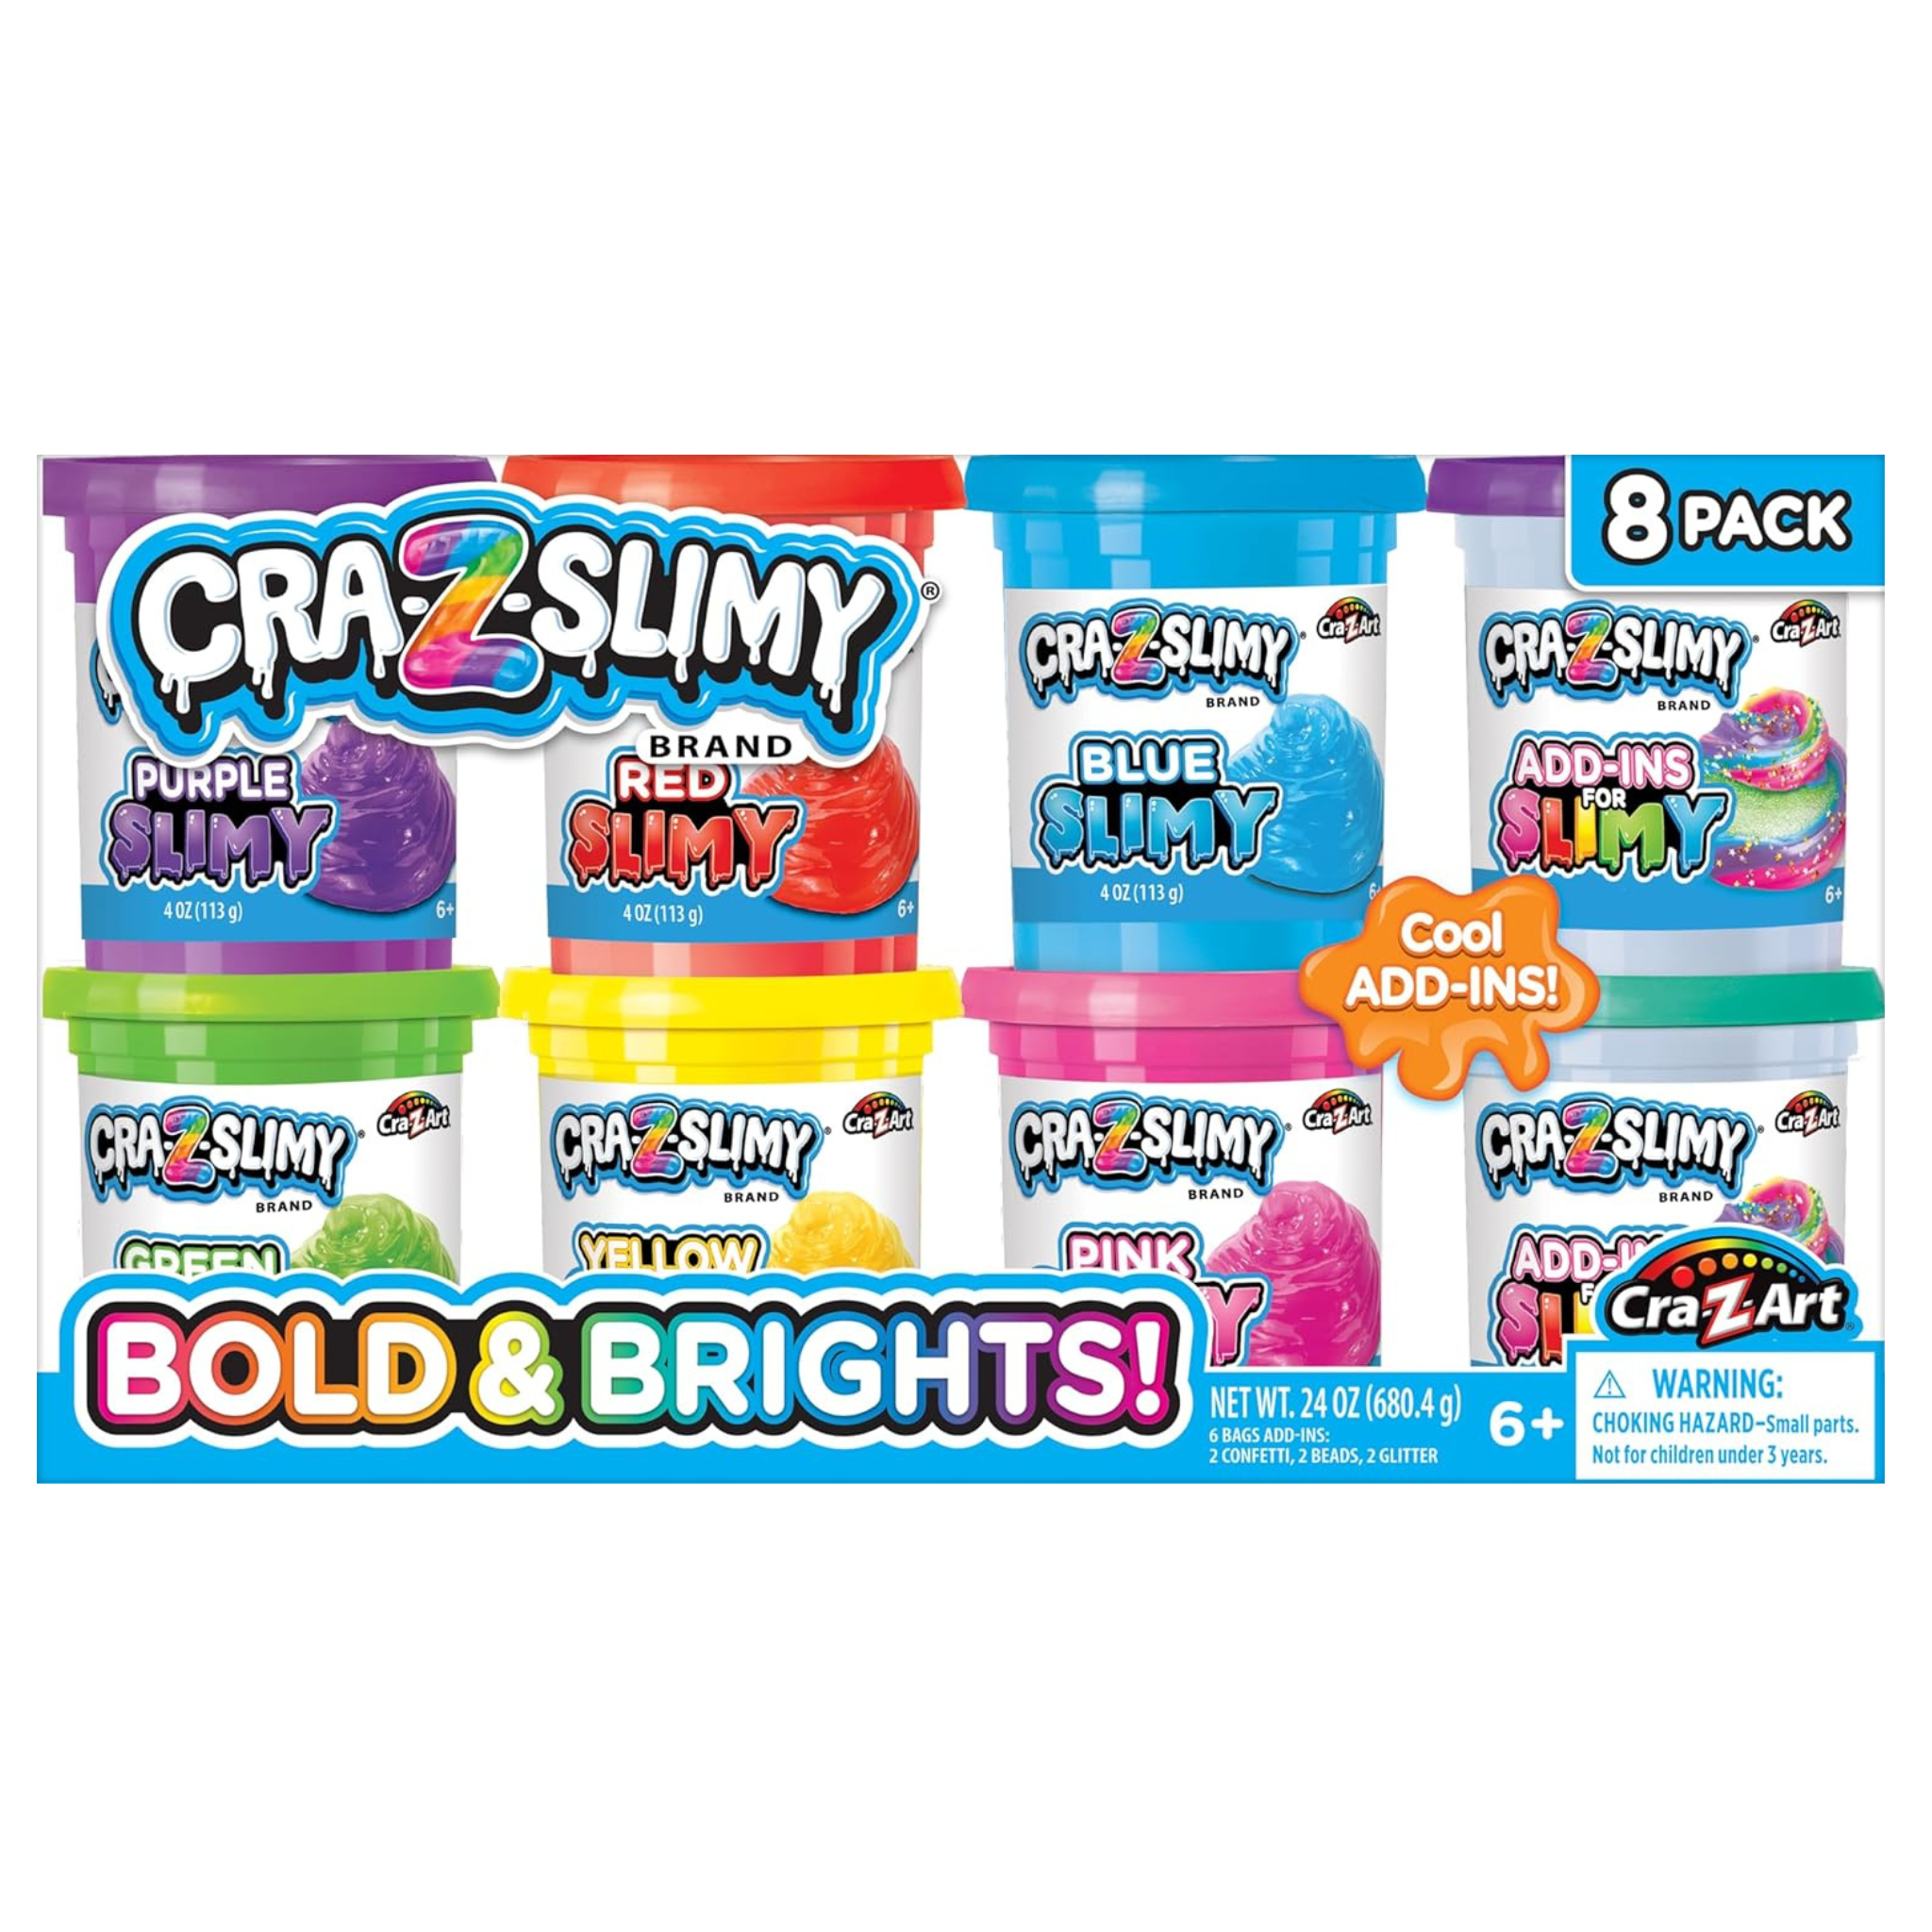 8-Pack Cra-Z-Slimy Bold & Brite Premade Slime Collection